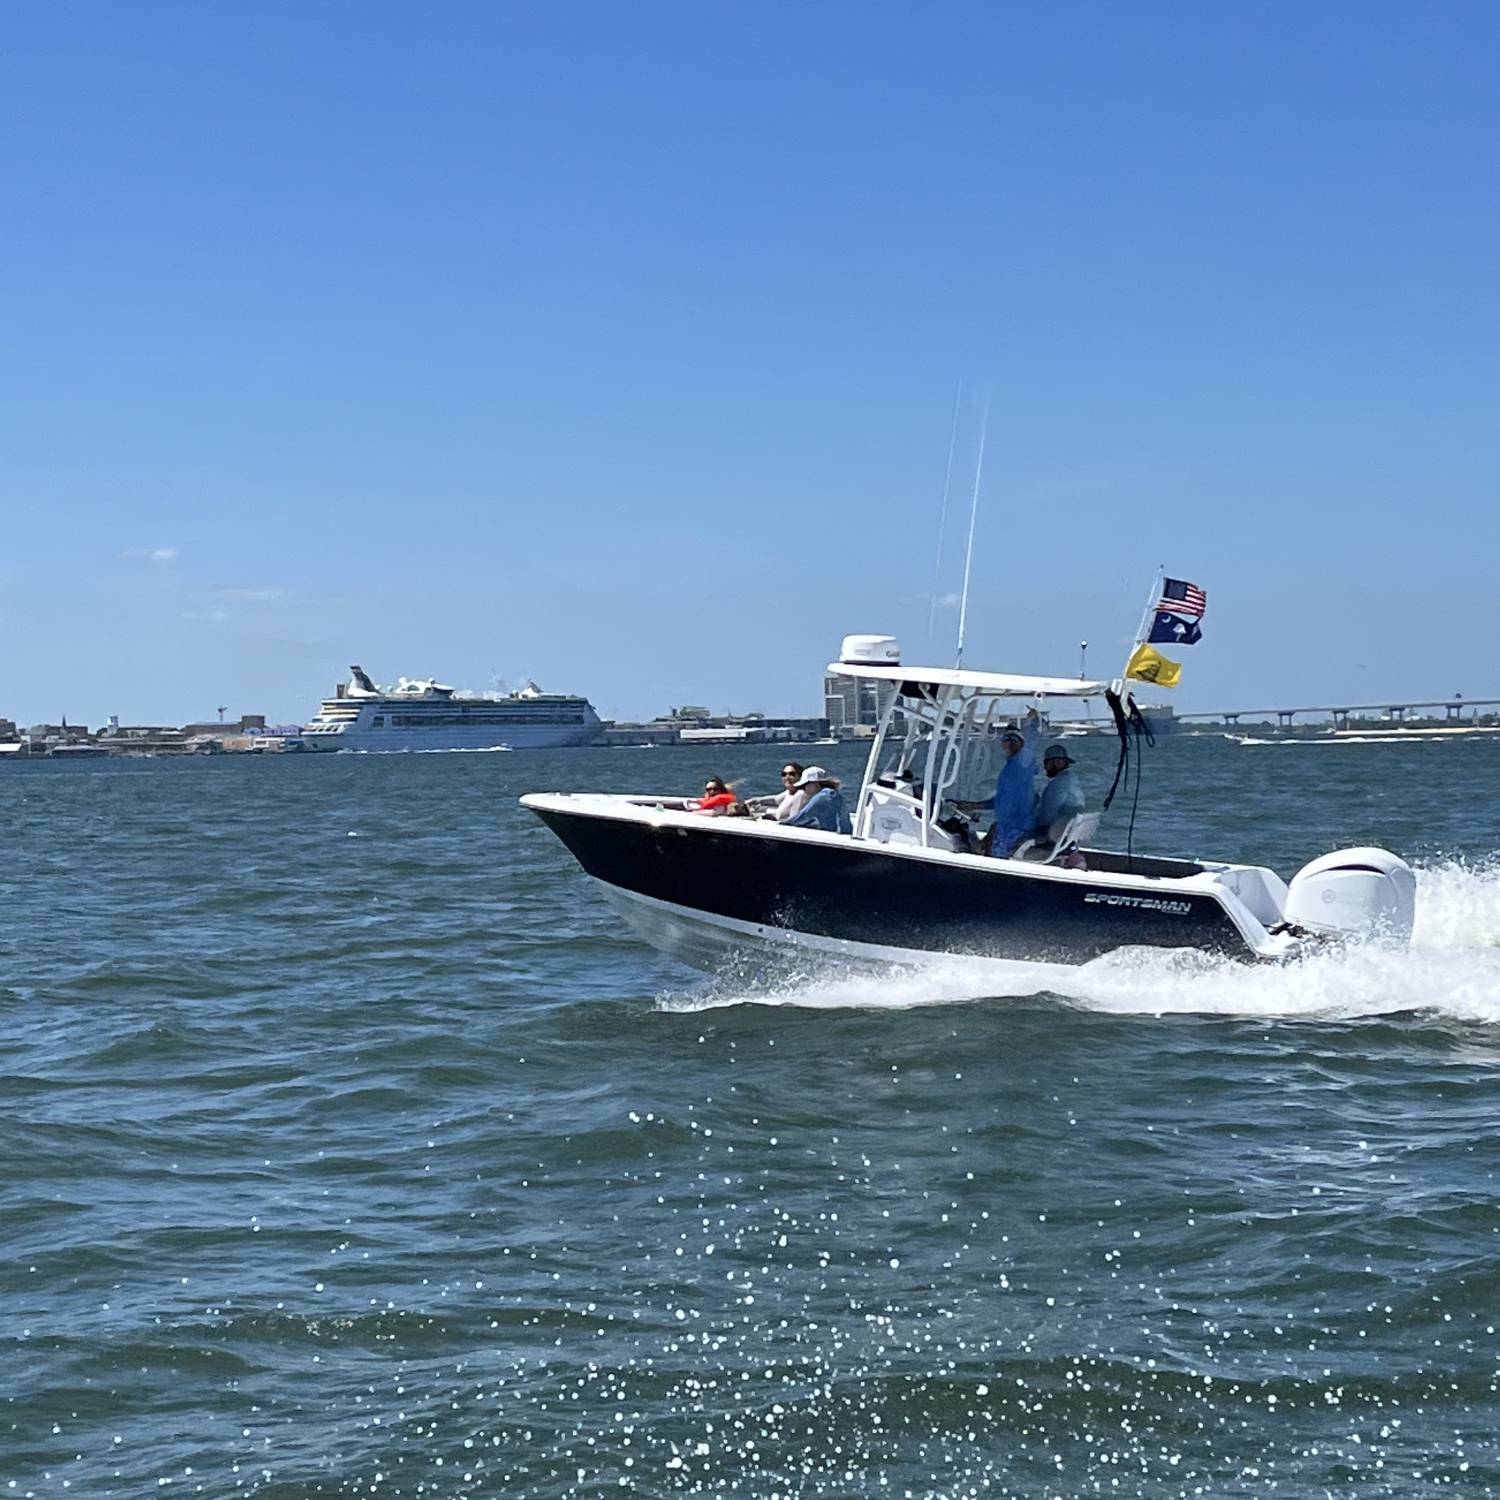 Title: Sunday Funday - On board their Sportsman Heritage 231 Center Console - Location: Charleston Harbor. Participating in the Photo Contest #SportsmanMay